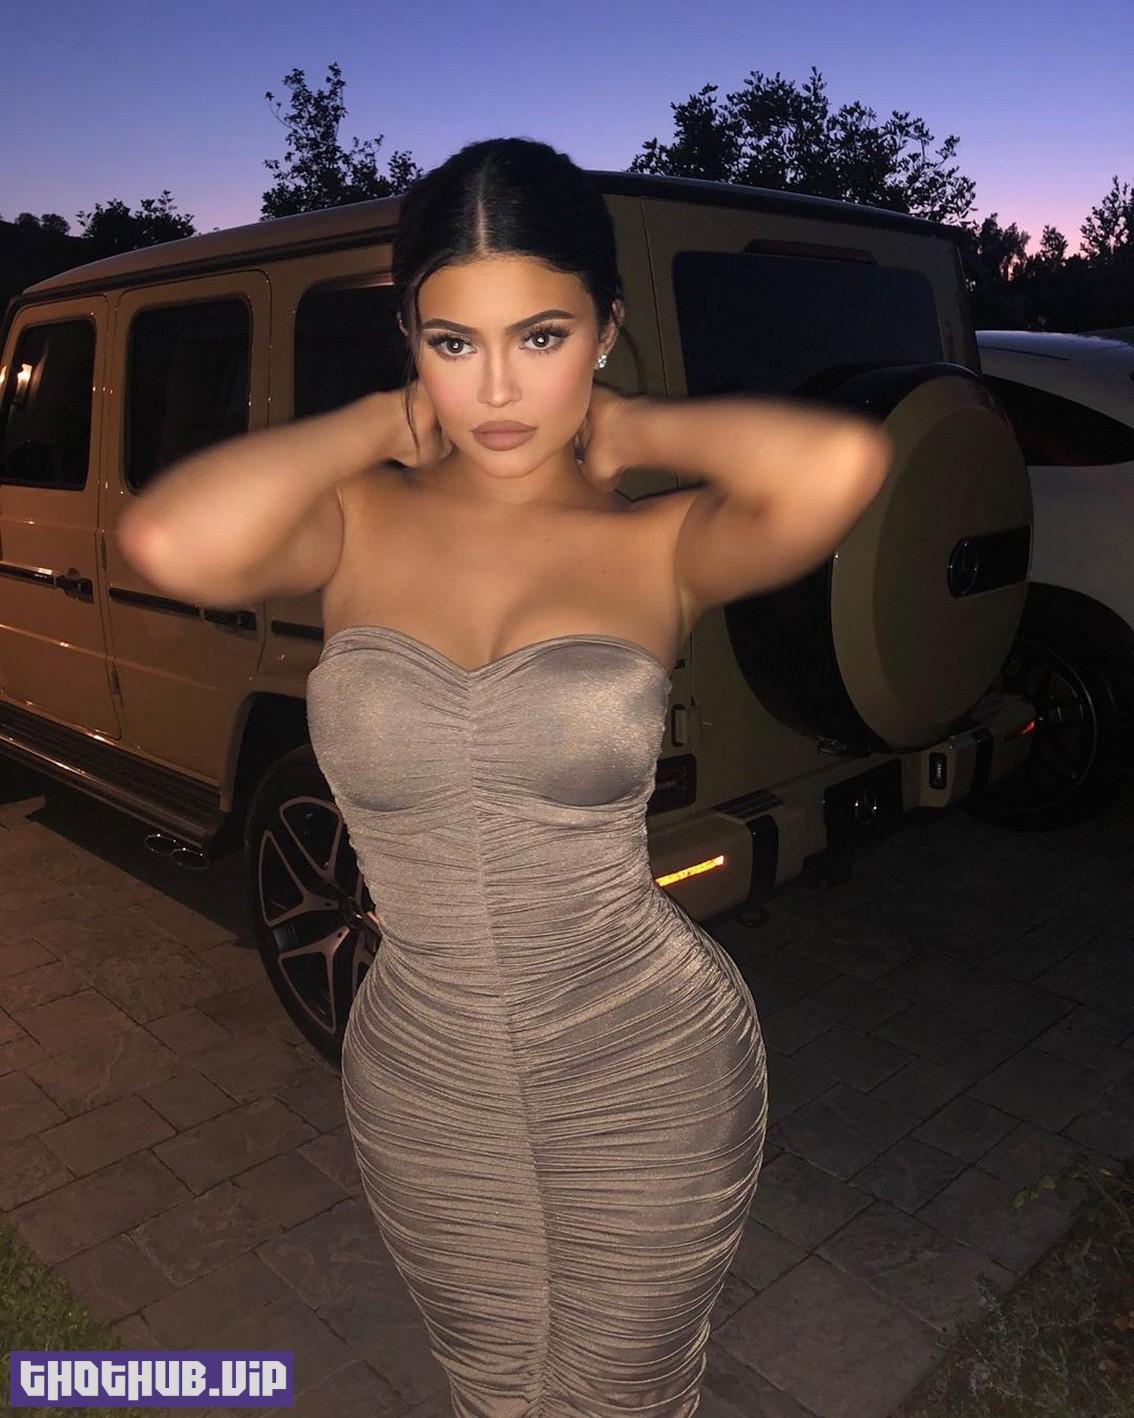 1667146262 76 Kylie Jenner Showed Off Big Tits In A White Top